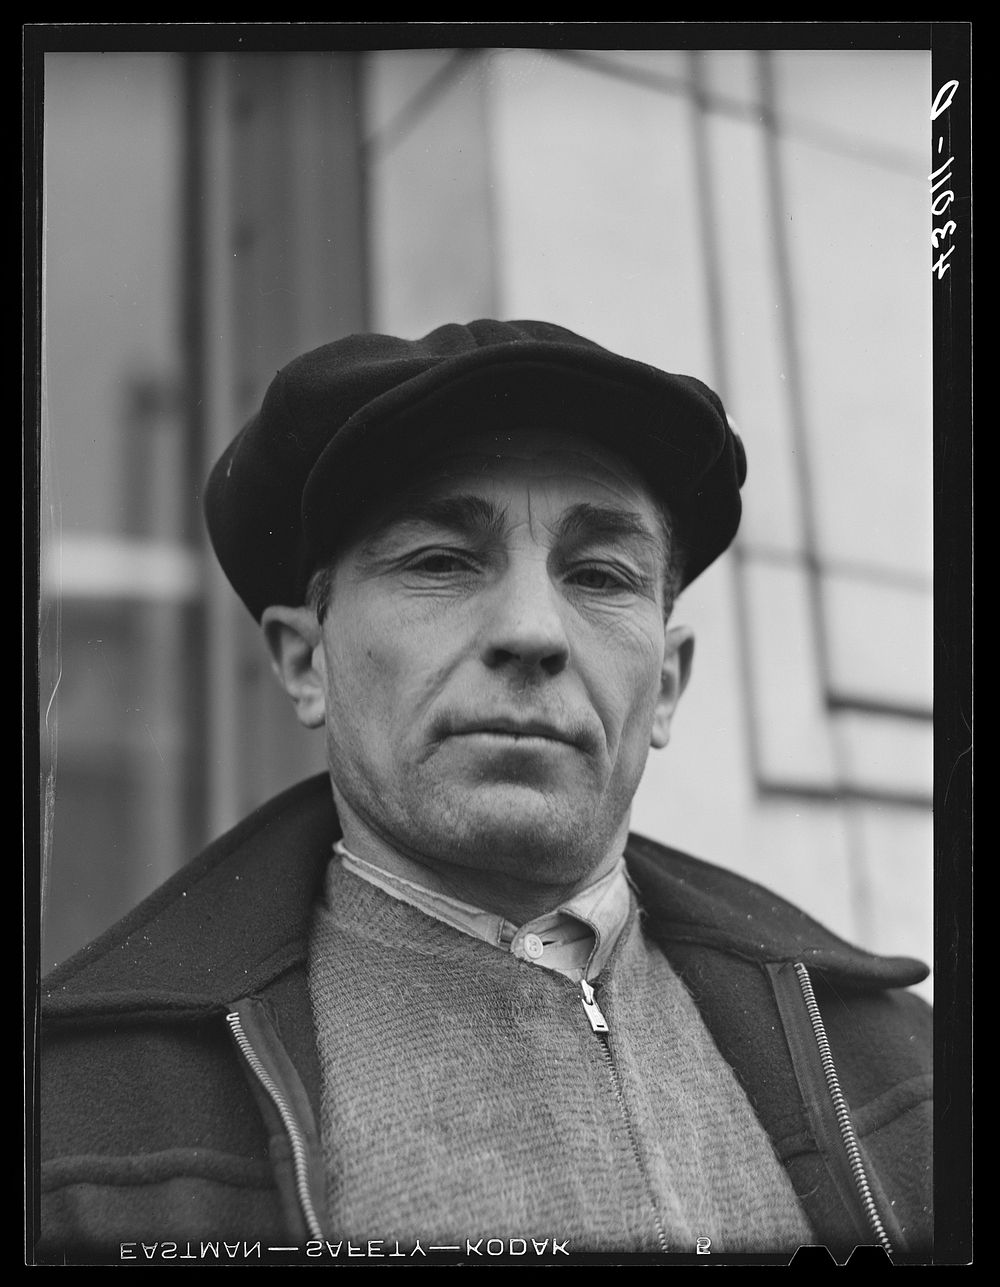 Italian steel worker at Pittsburgh Crucible Steel Company in Midland, Pennsylvania. Sourced from the Library of Congress.